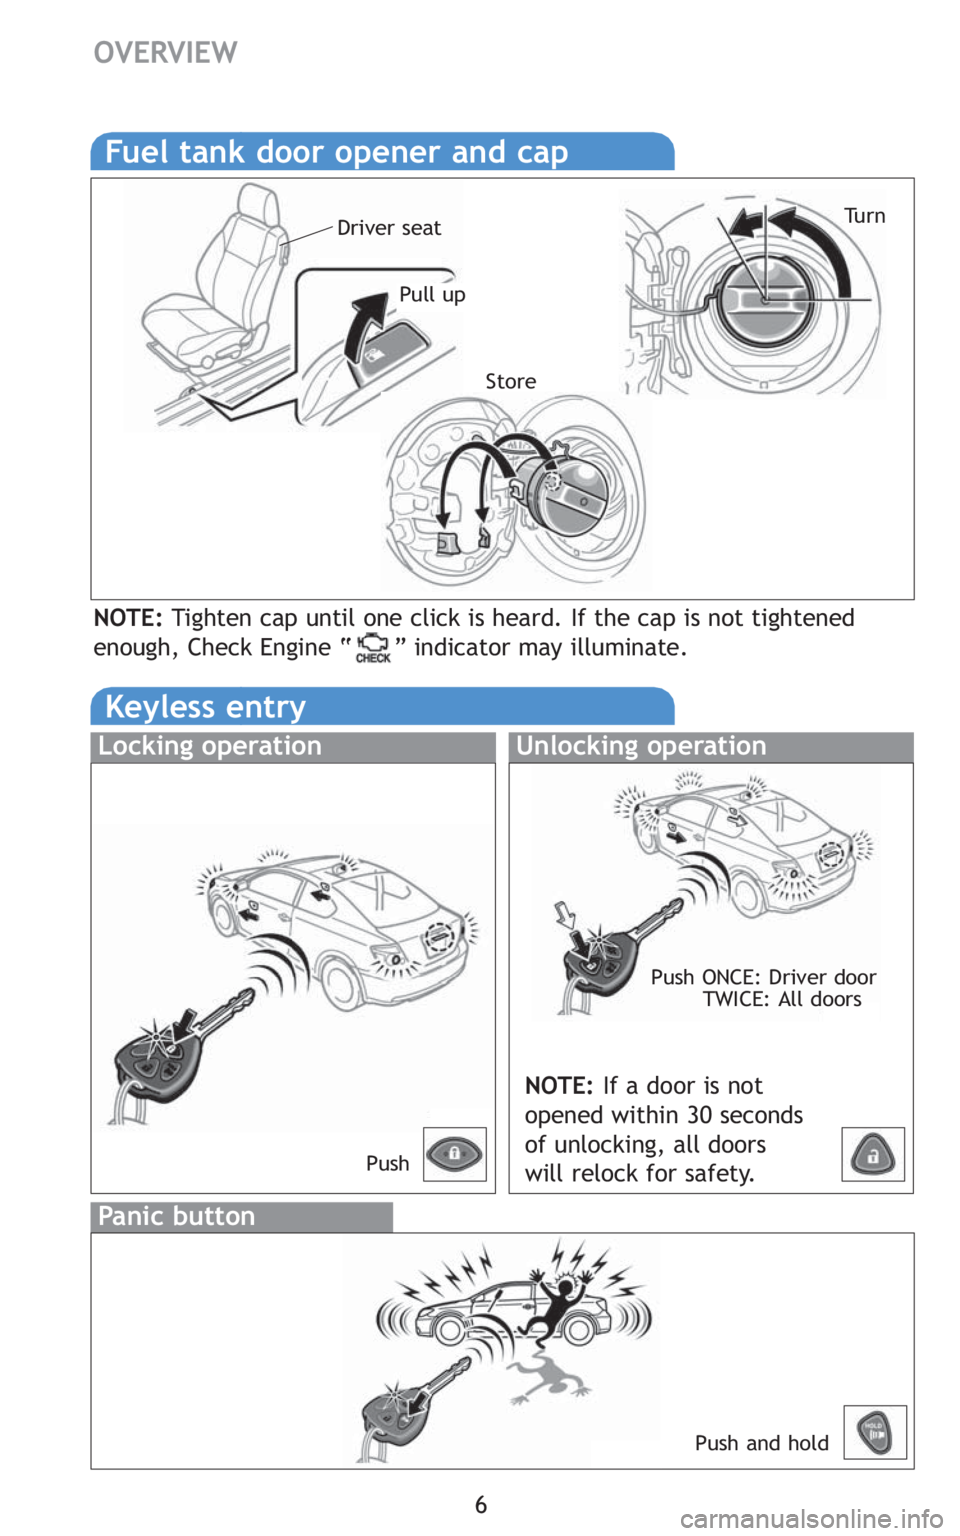 TOYOTA tC 2010  Owners Manual (in English) 6
OVERVIEW
Panic button
Keyless entry
NOTE:If a door is not
opened within 30 seconds
of unlocking, all doors
will relock for safety.
Locking operationUnlocking operation
PushPush ONCE: Driver door
TWI